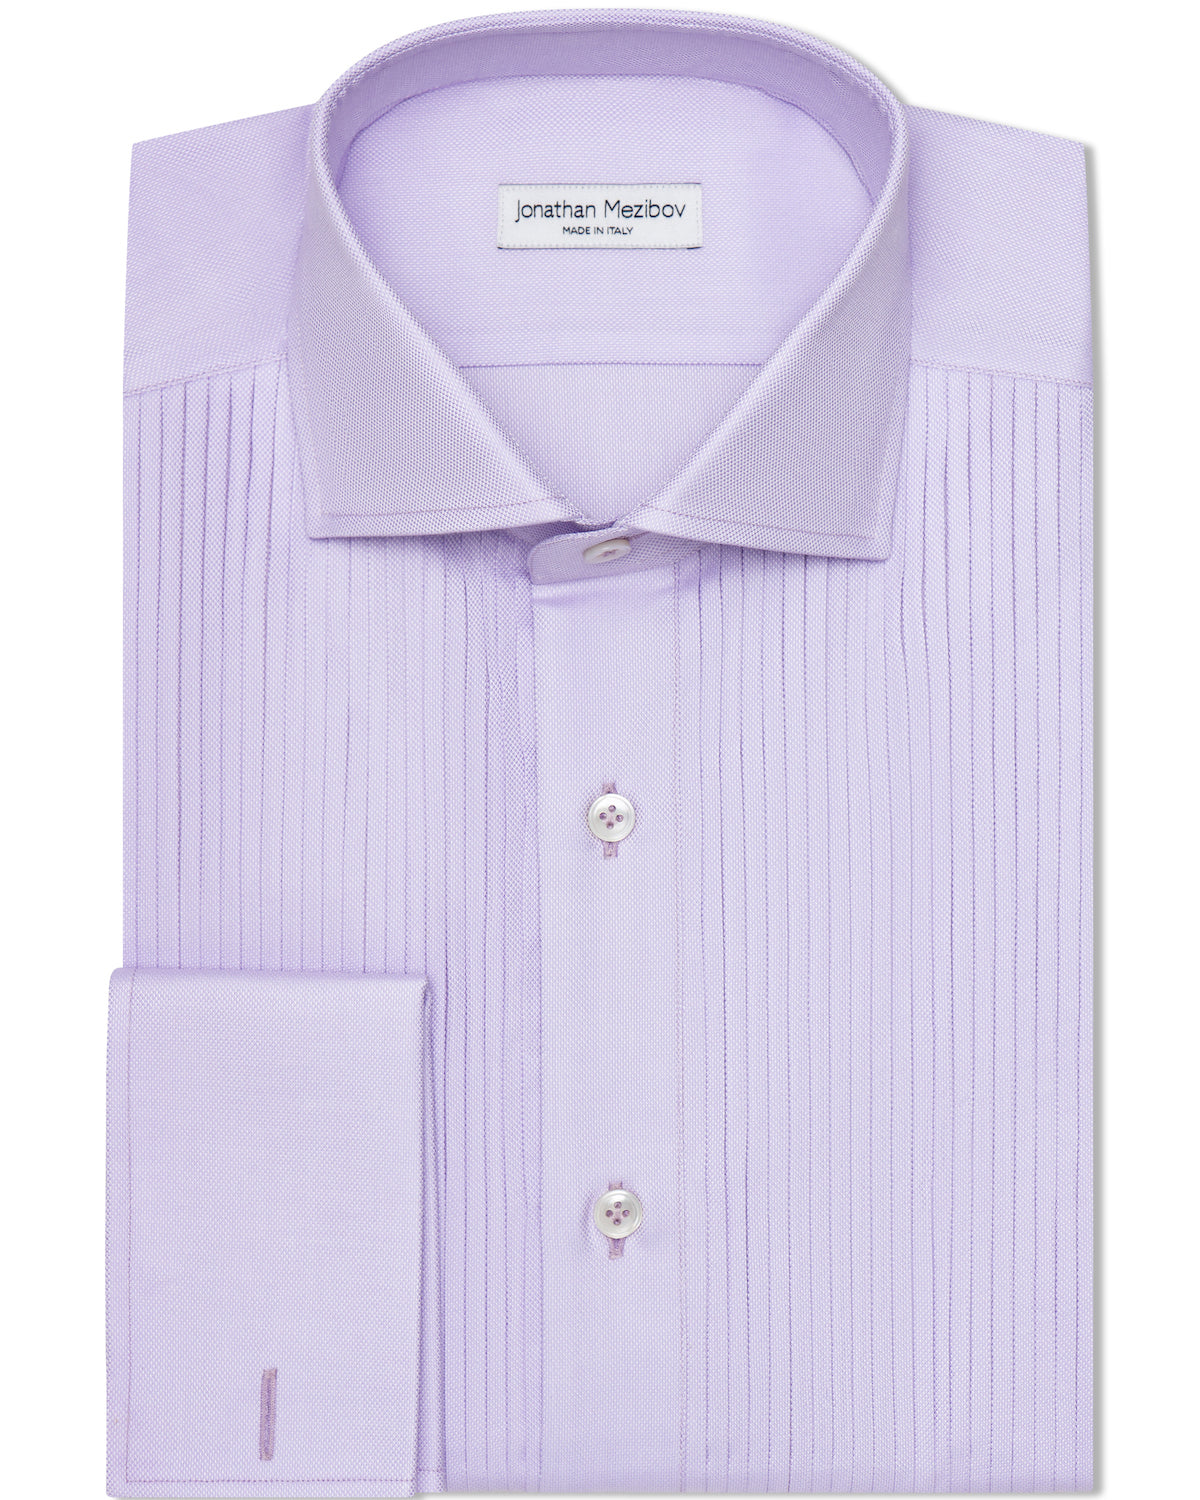 Jonathan Mezibov lavender Royal Oxford Tuxedo Shirt with a spread collar and French cuffs.